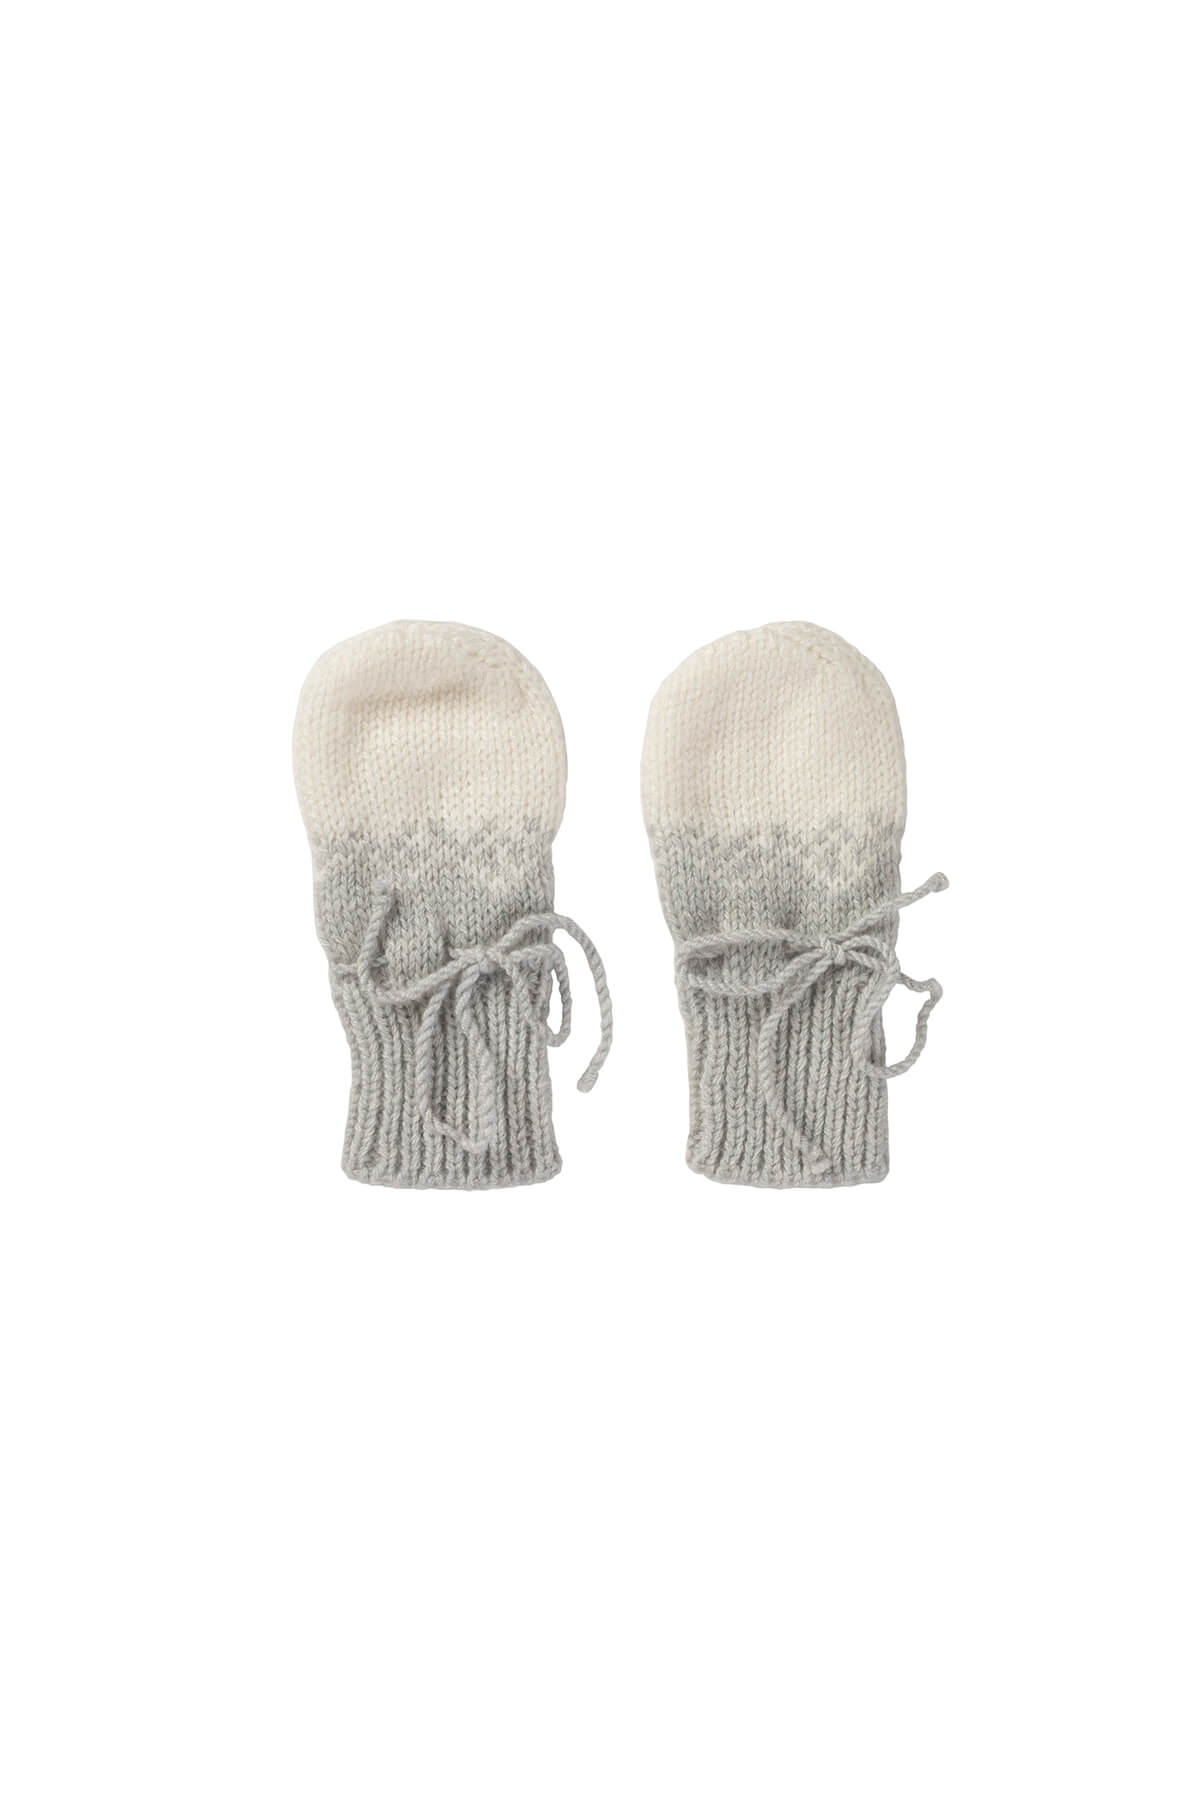 Johnstons of Elgin Gift Set includes our Cashmere Ombre Baby Hat, Mittens & Booties in Pumice on white AW21GIFTSET22A